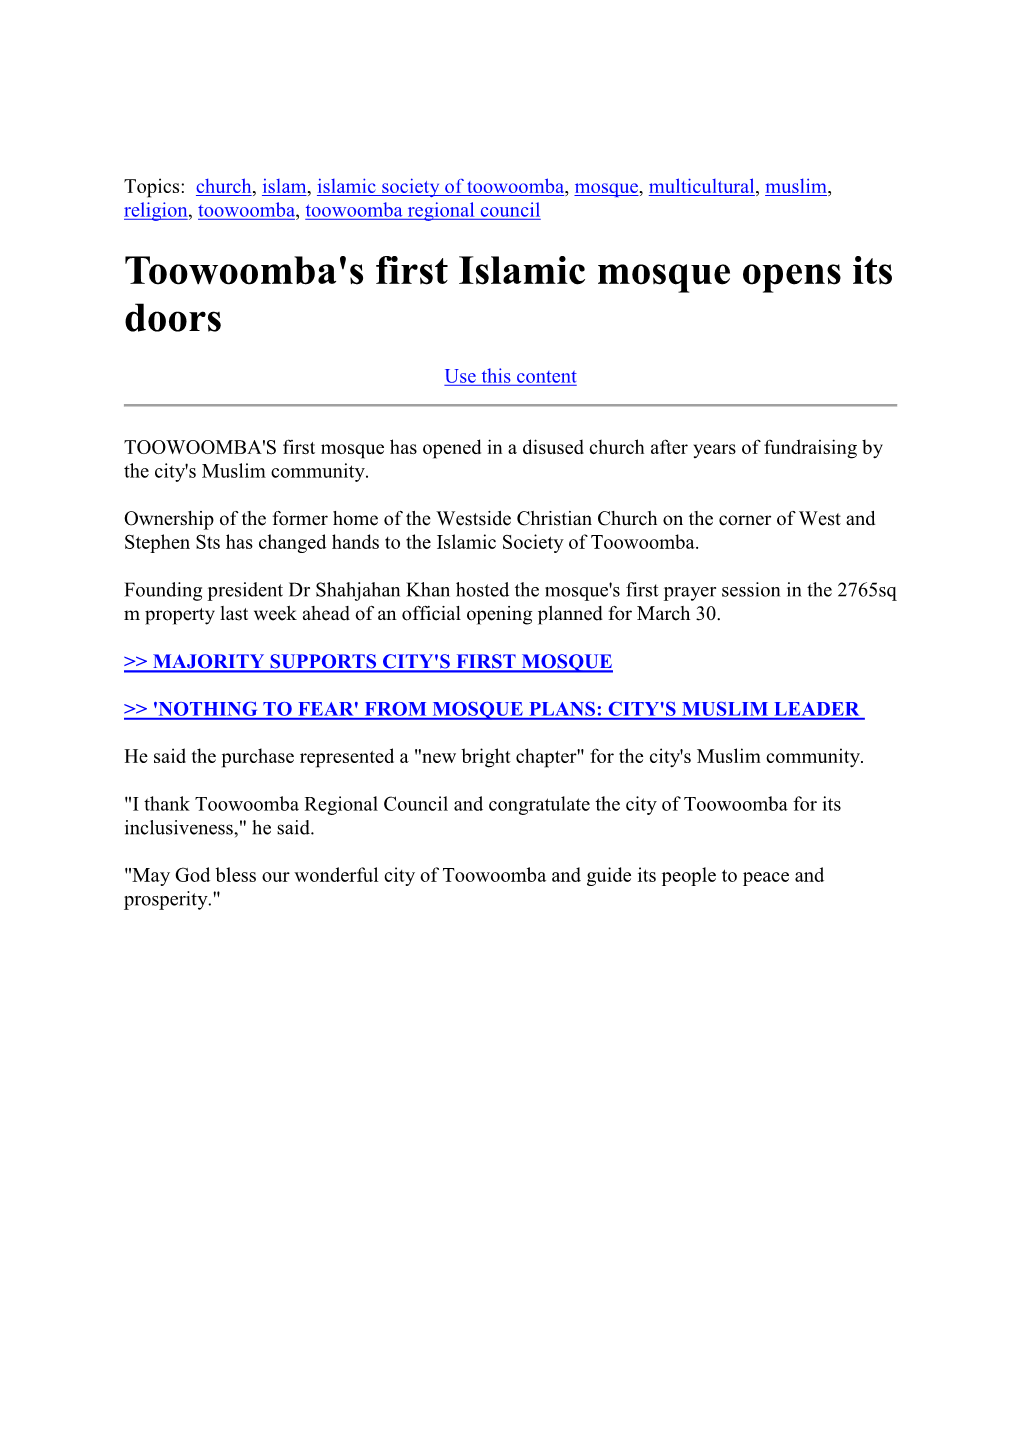 Toowoomba's First Islamic Mosque Opens Its Doors